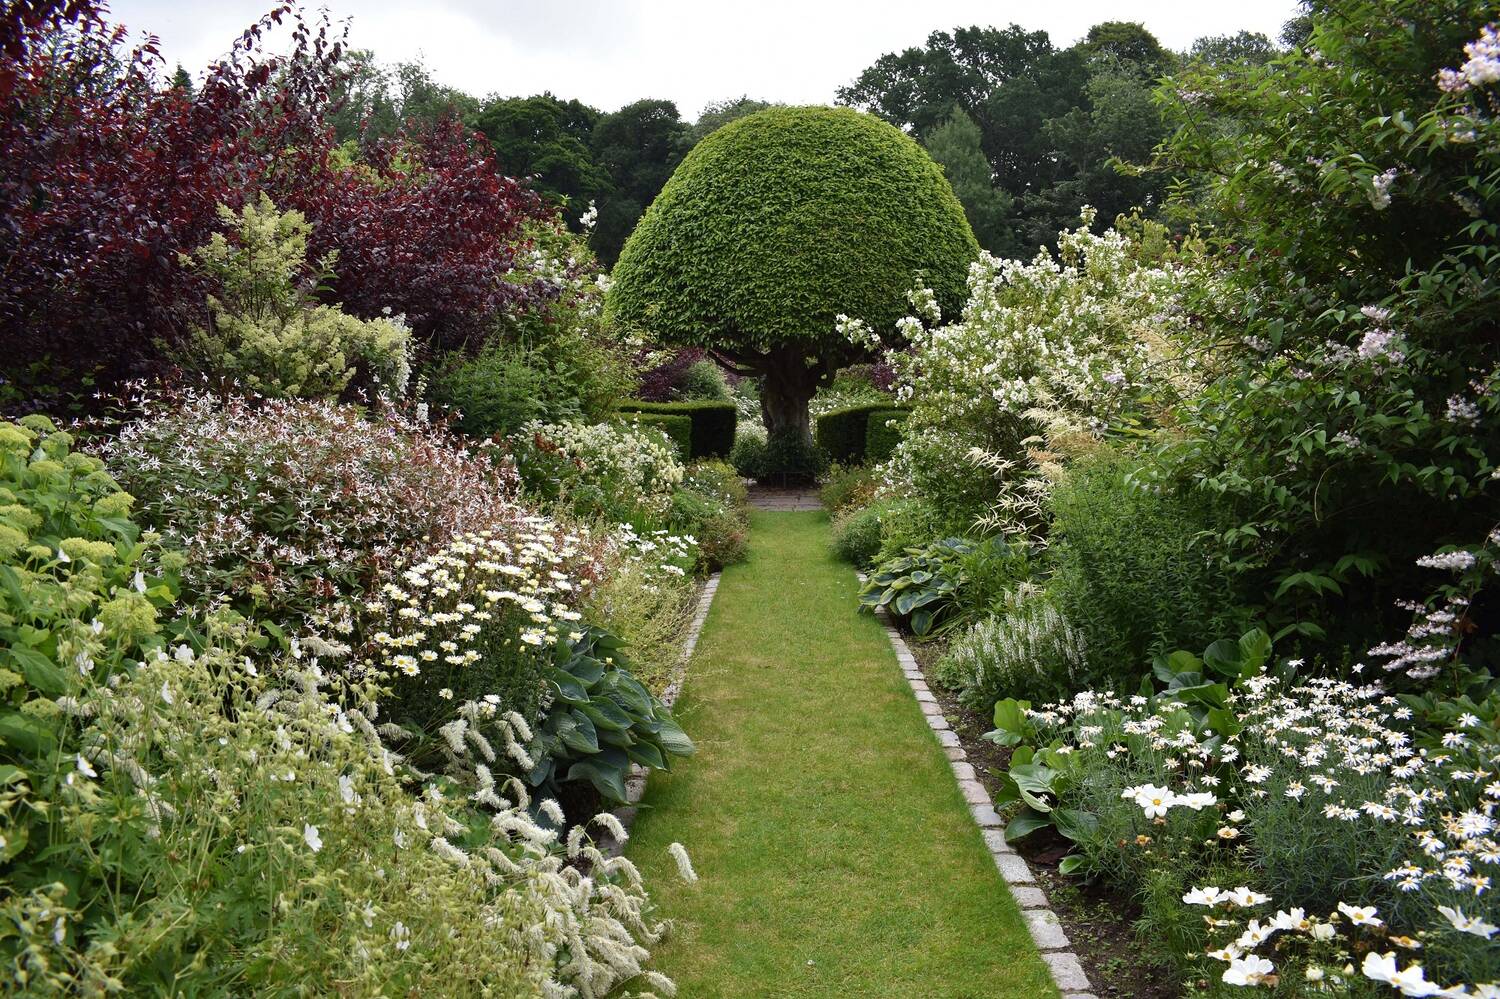 A grassy garden path leads between two richly filled flower borders towards a shaped tree. The borders are mostly filled with white flowers.